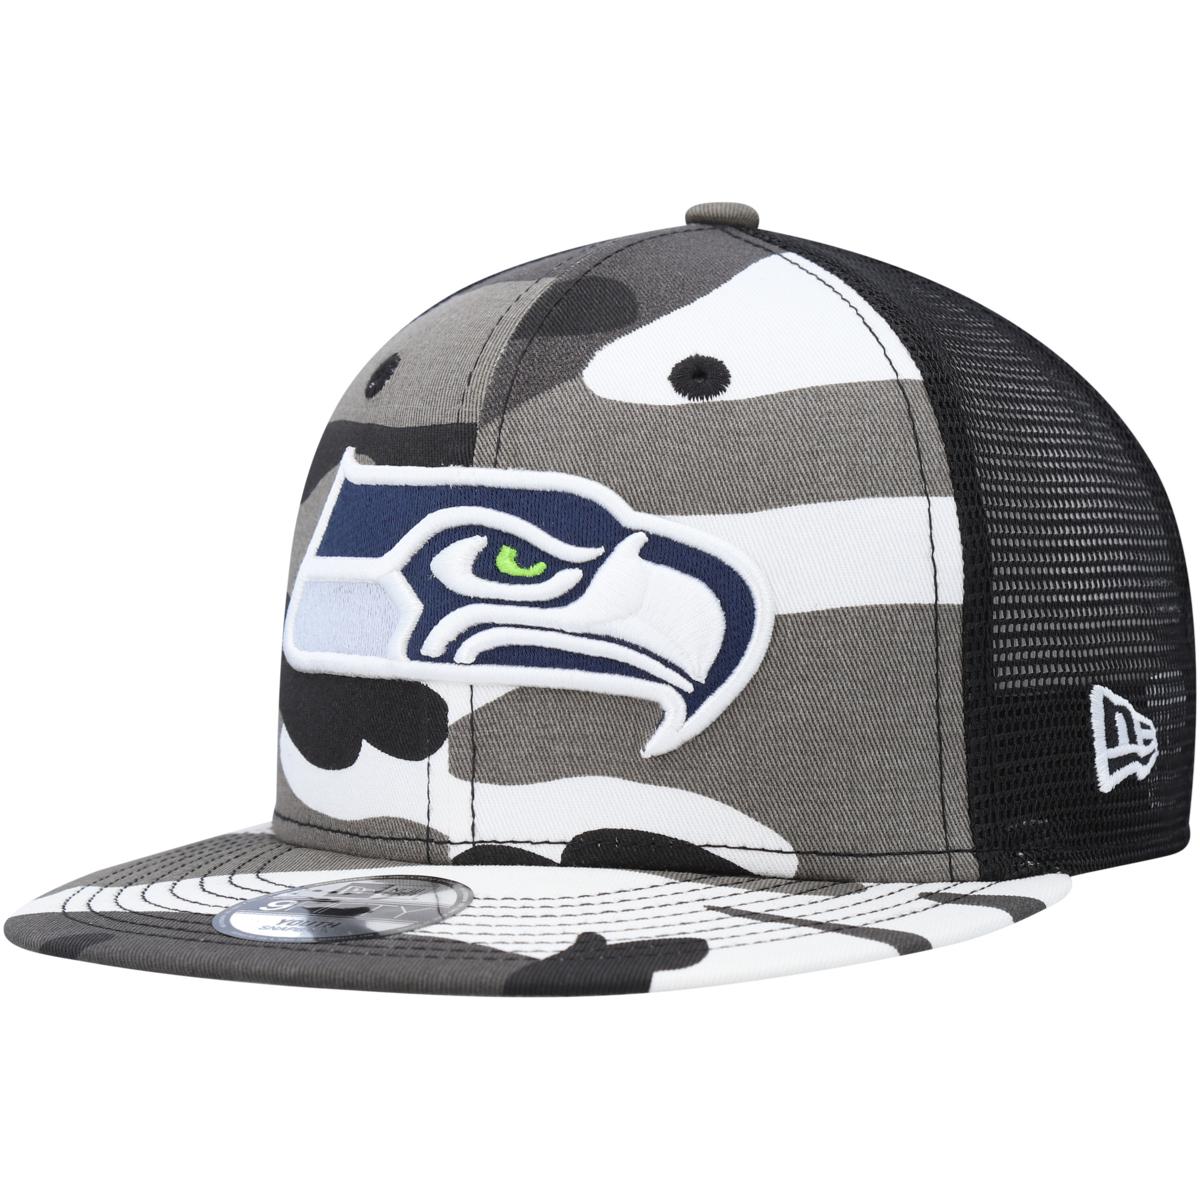 Men's New Era Cream Seattle Seahawks Color Pack 9FIFTY Snapback Hat